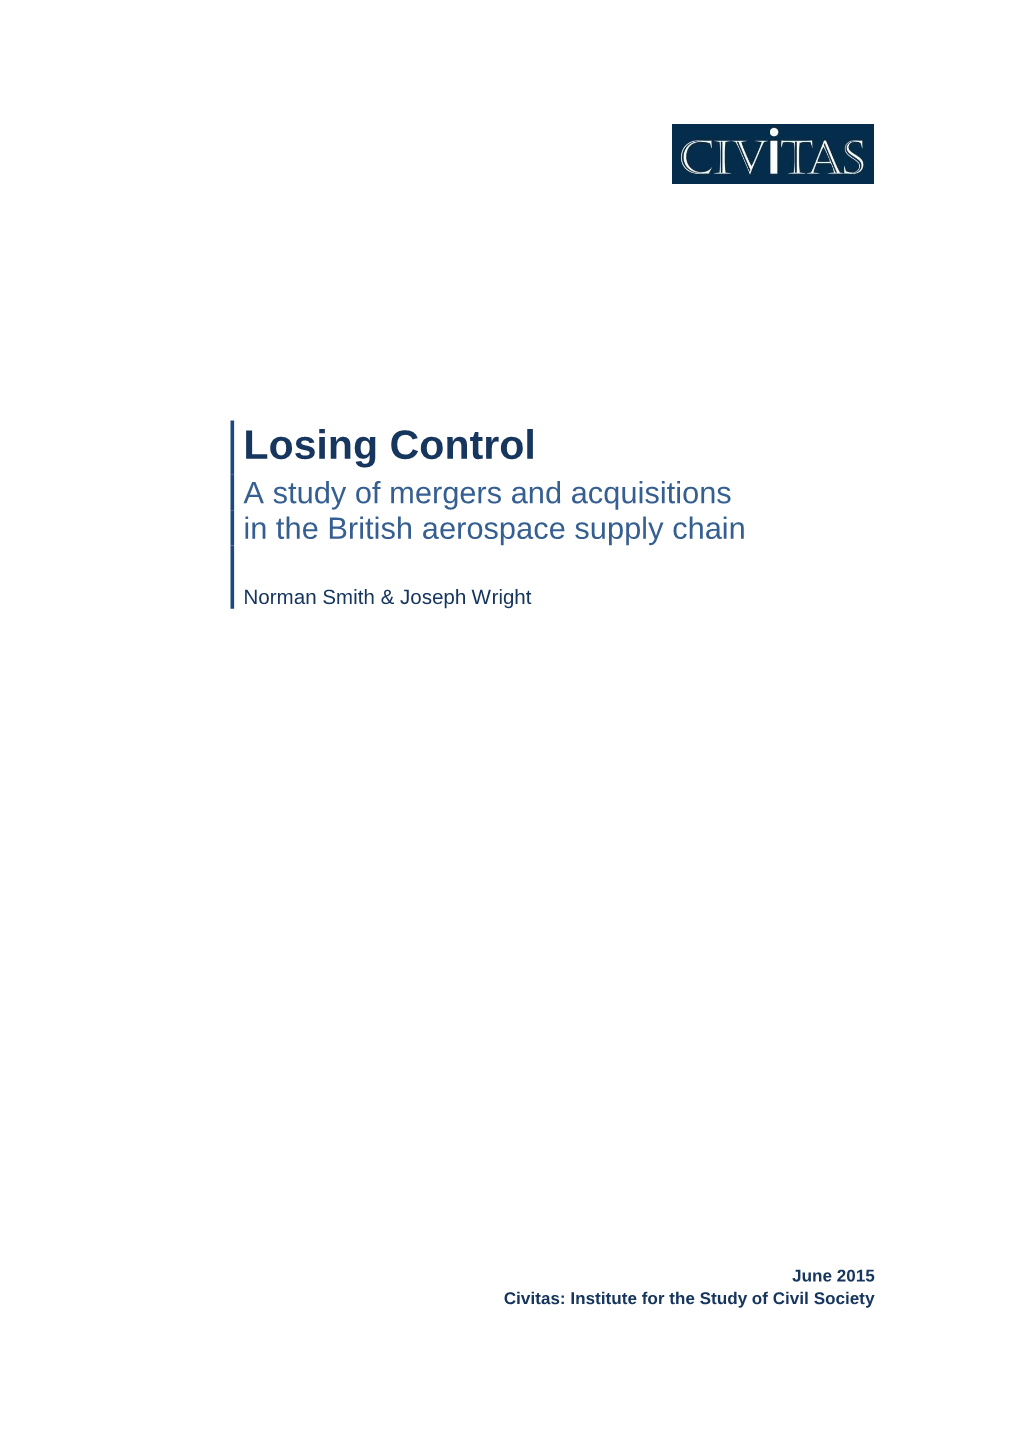 Losing Control a Study of Mergers and Acquisitions in the British Aerospace Supply Chain